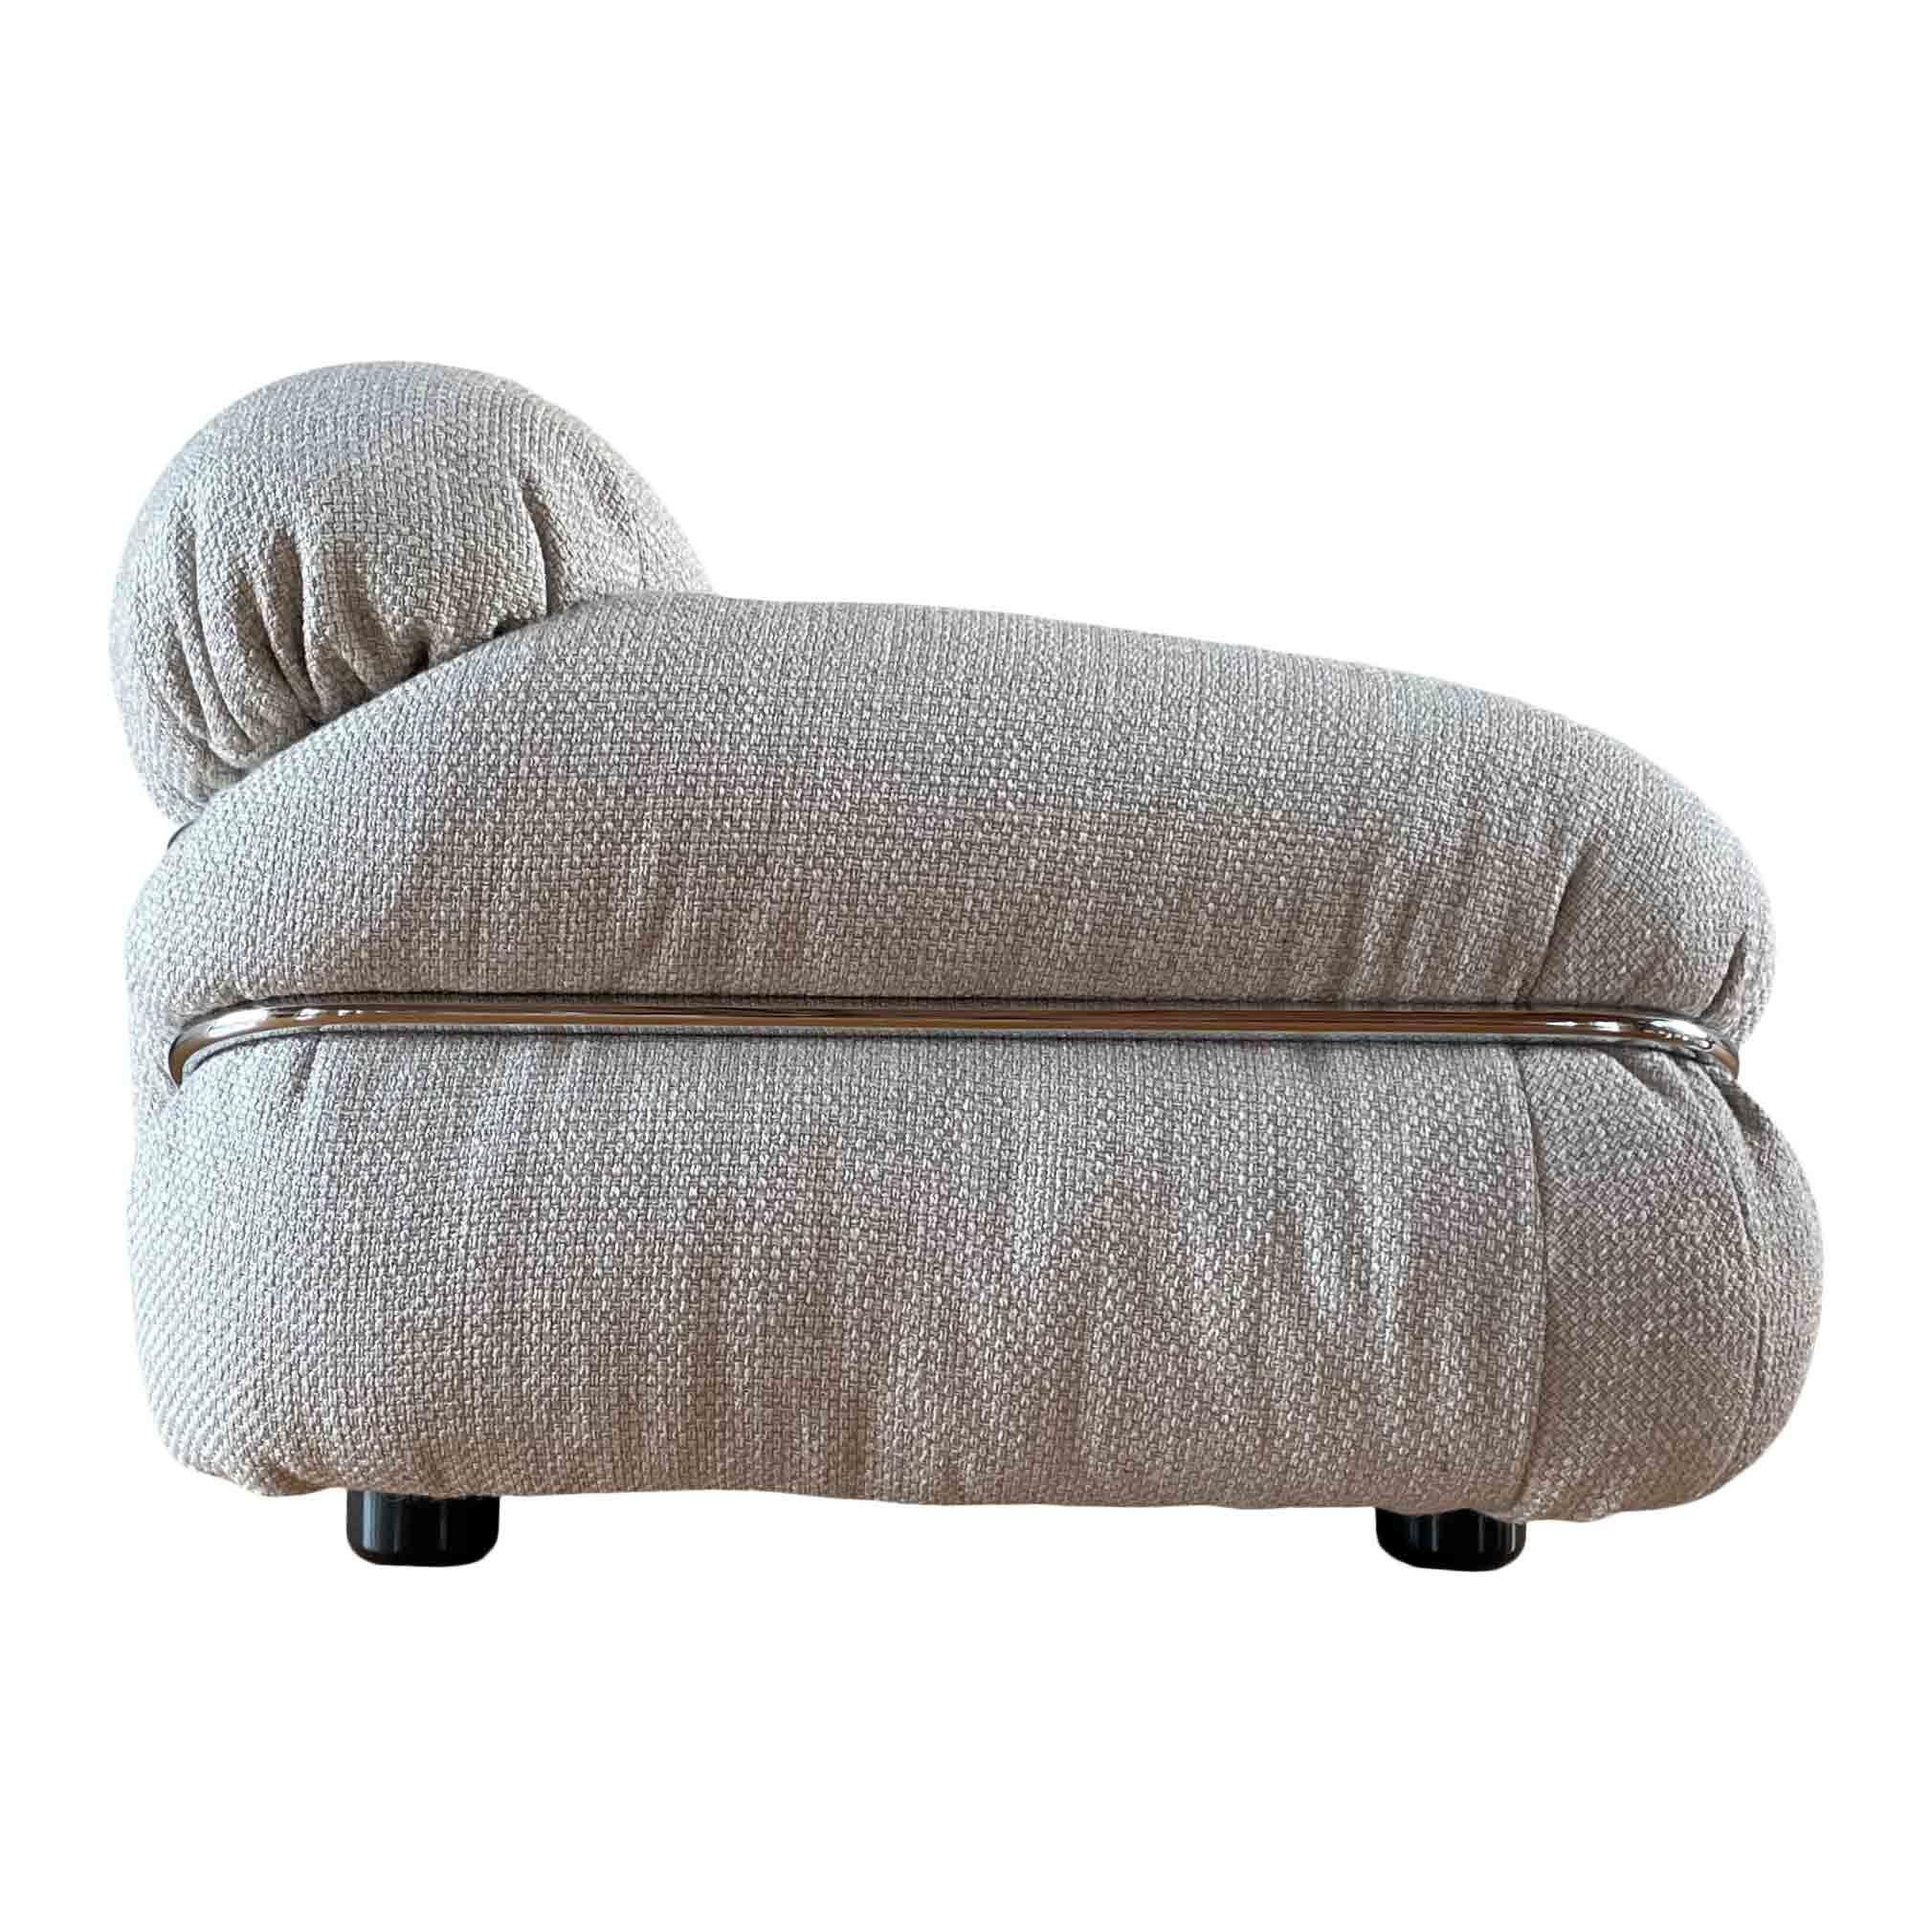 Gianfranco Frattini Beige Wool Bouclé Sesann Two-Seater Sofa for Cassina, 1972 In Good Condition For Sale In Vicenza, IT